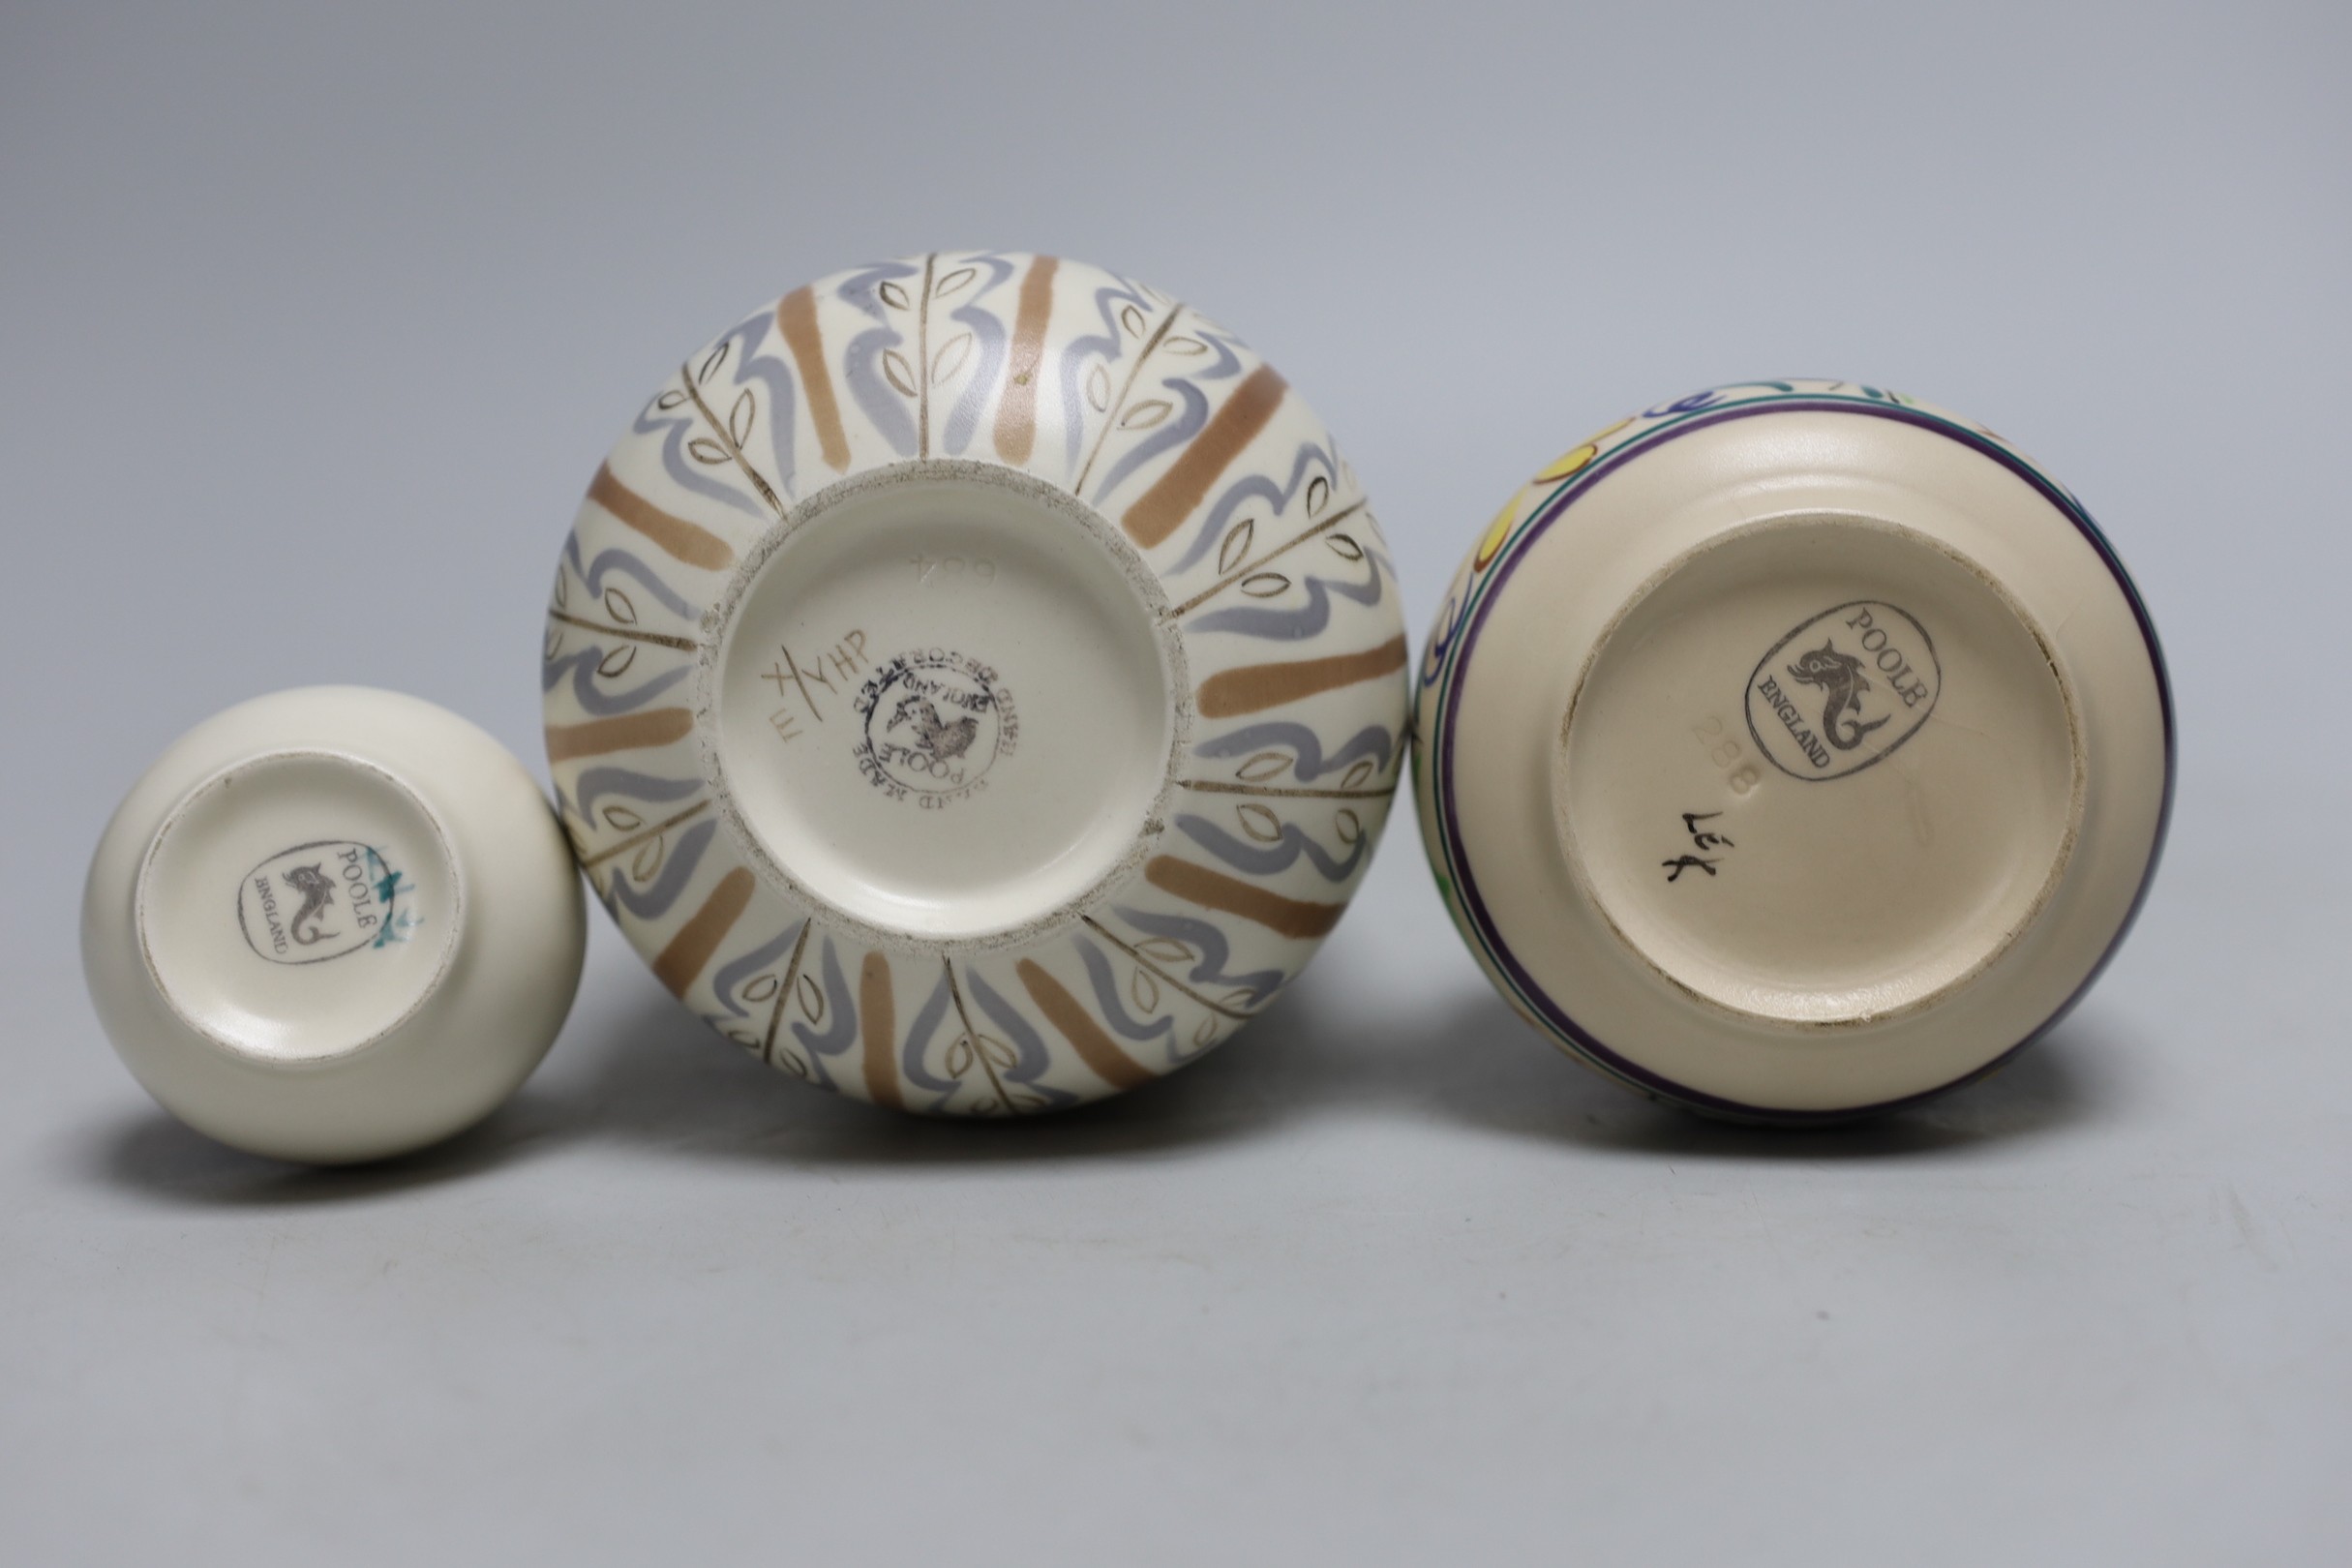 A Poole jam dish and cover, together with two Poole vases